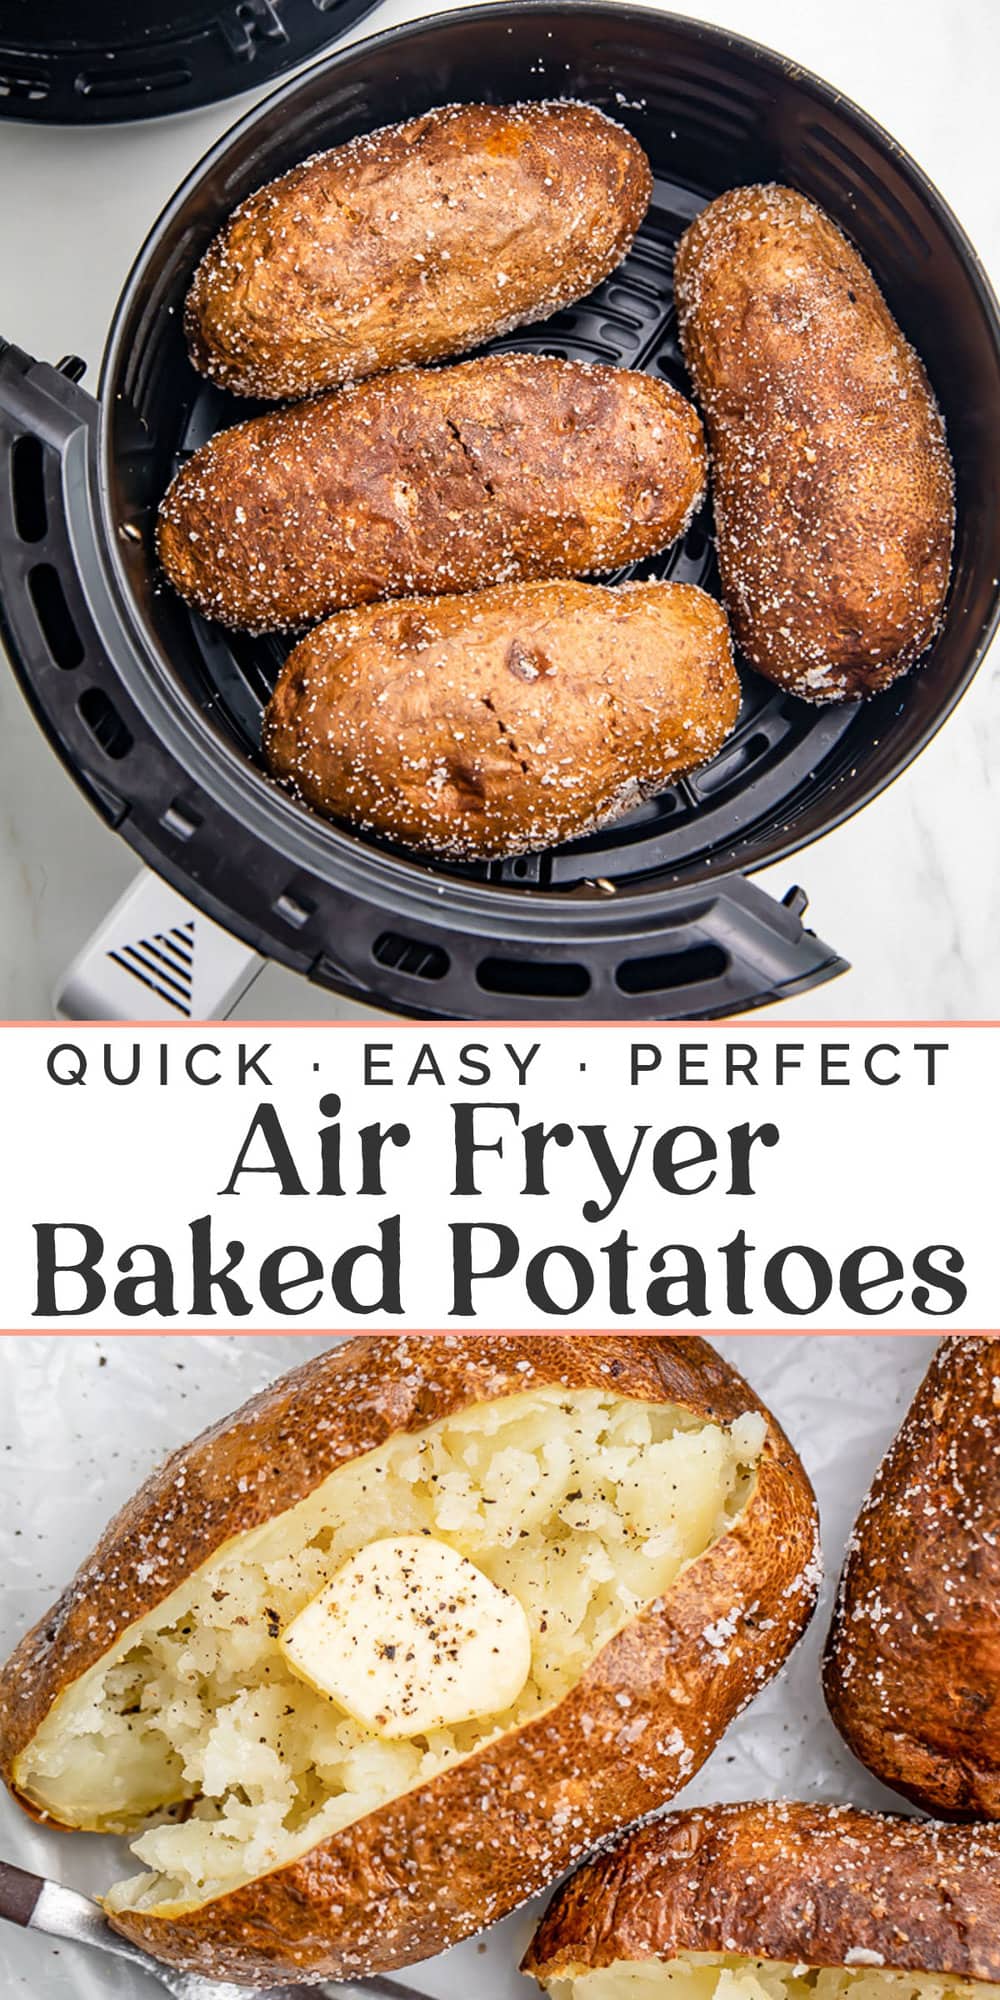 Pin graphic for air fryer baked potatoes.